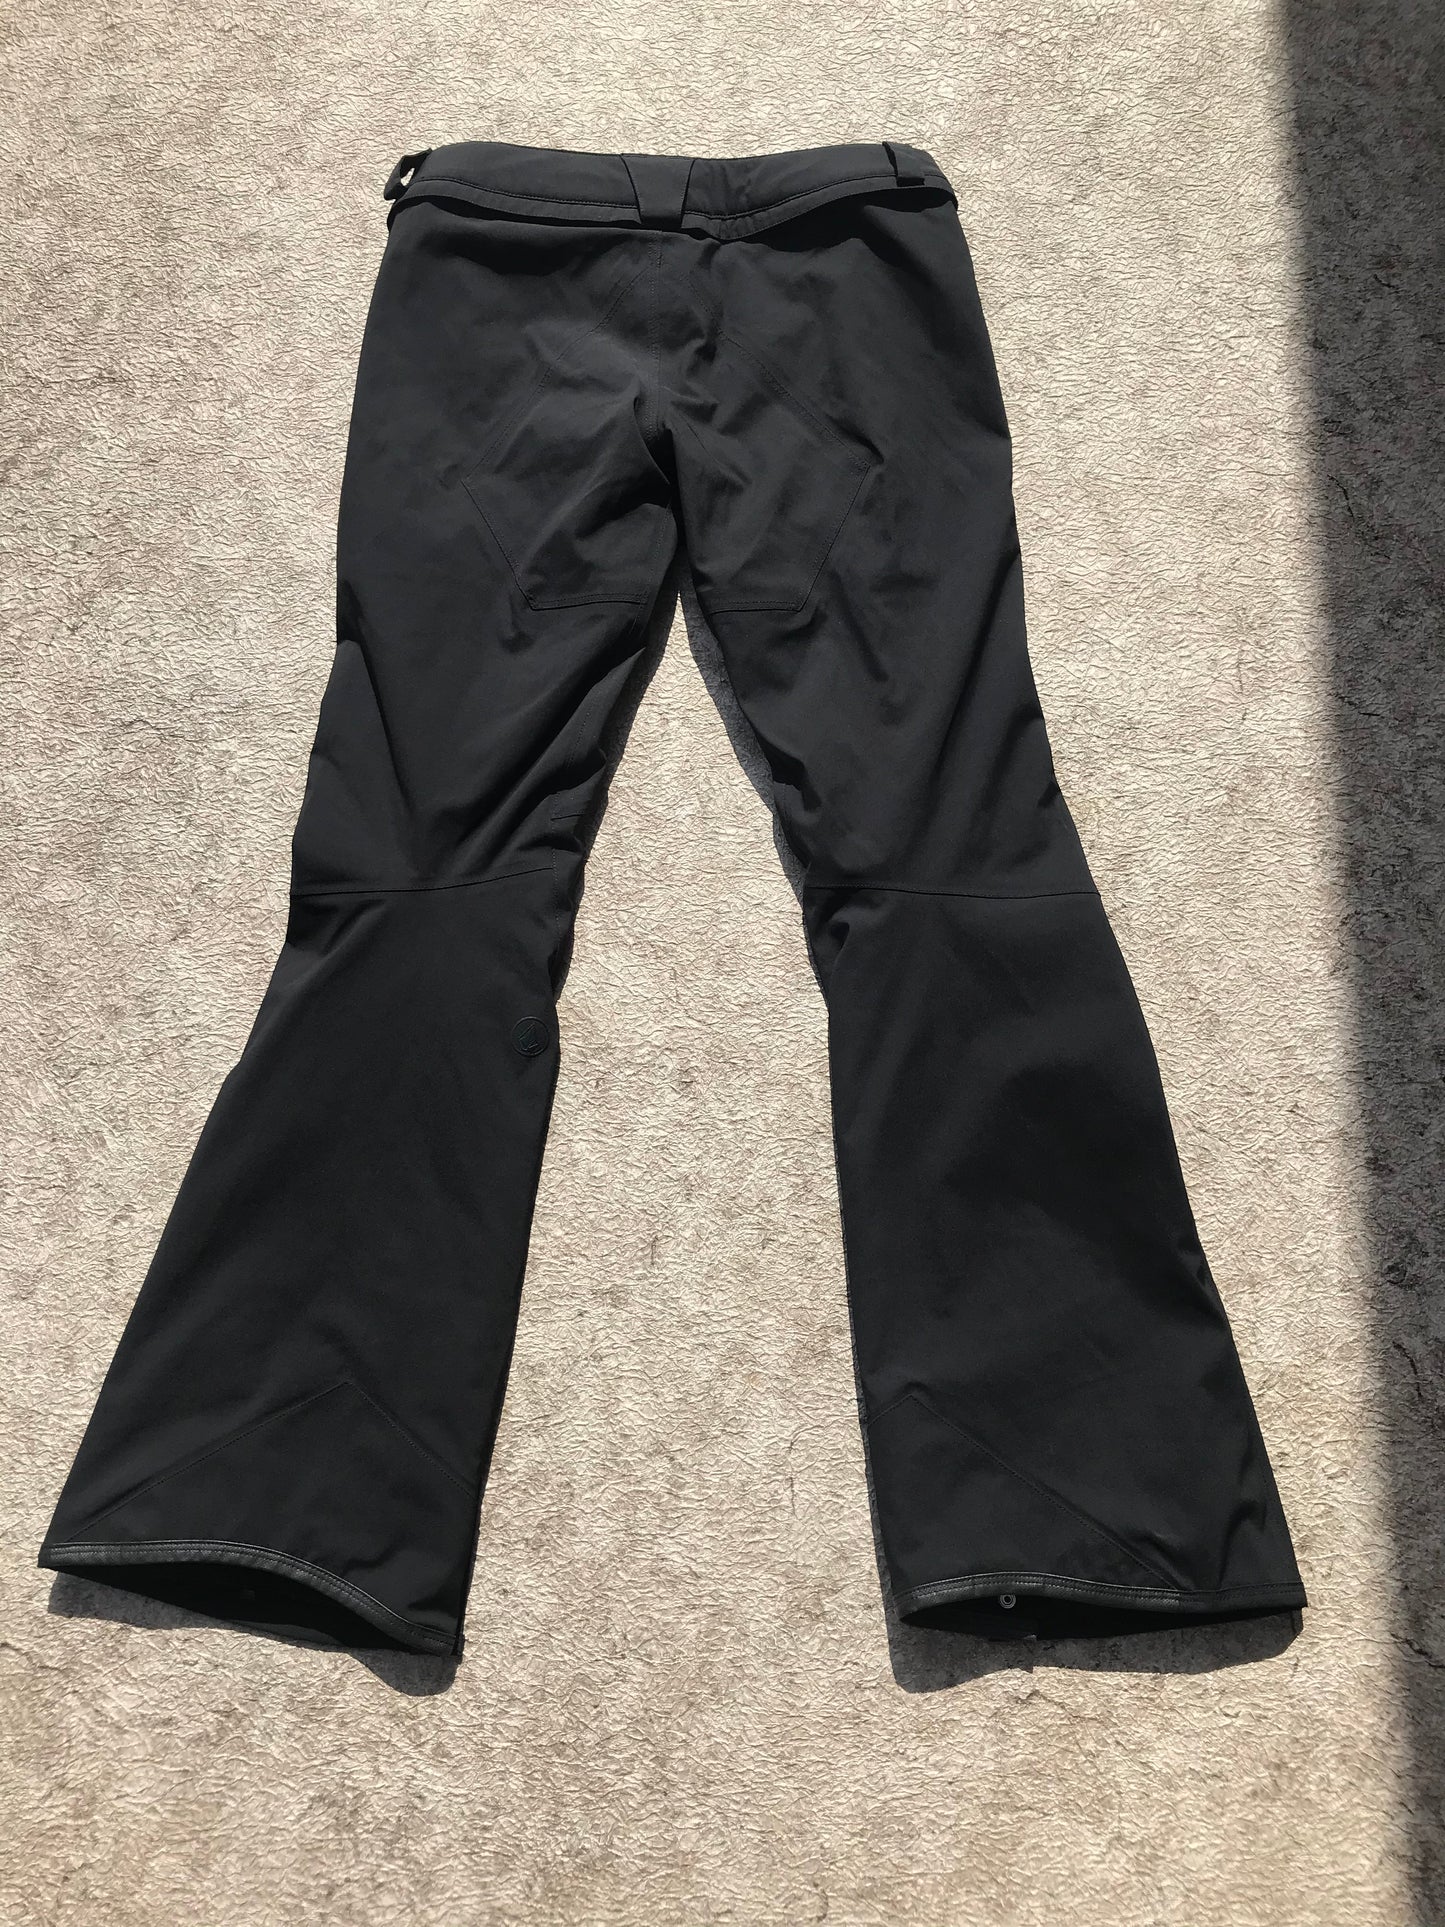 Snow Pants Men's Size Small Volcom Gore-Tex Waterproof Sealed Seams Black Snowboarding New Without Tags Outstanding